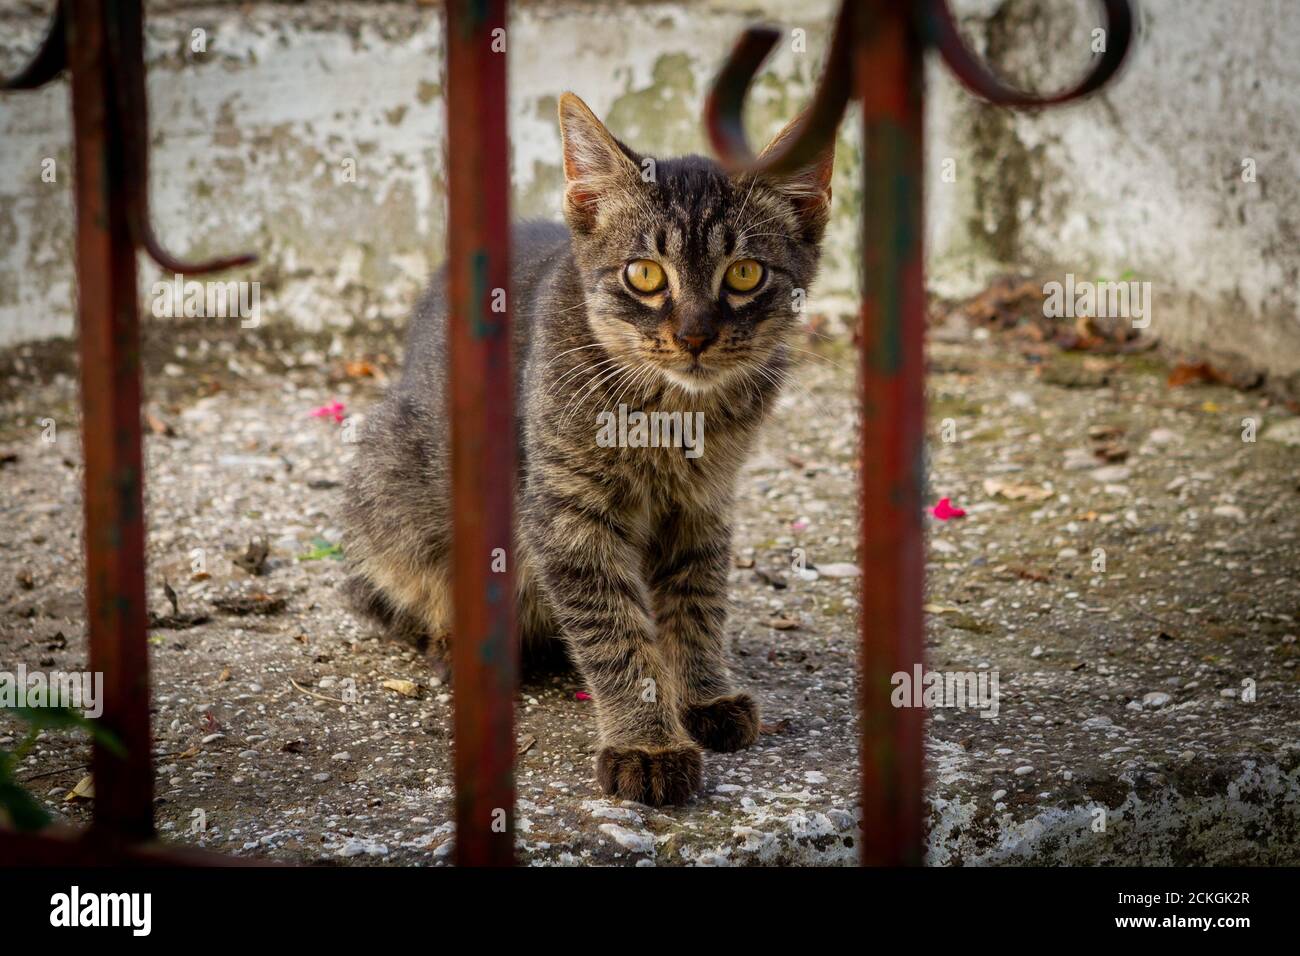 A cute cat who appears to be trapped in a prison. This picture be taken in Grece. His yellow eyes are looking at you. Stock Photo